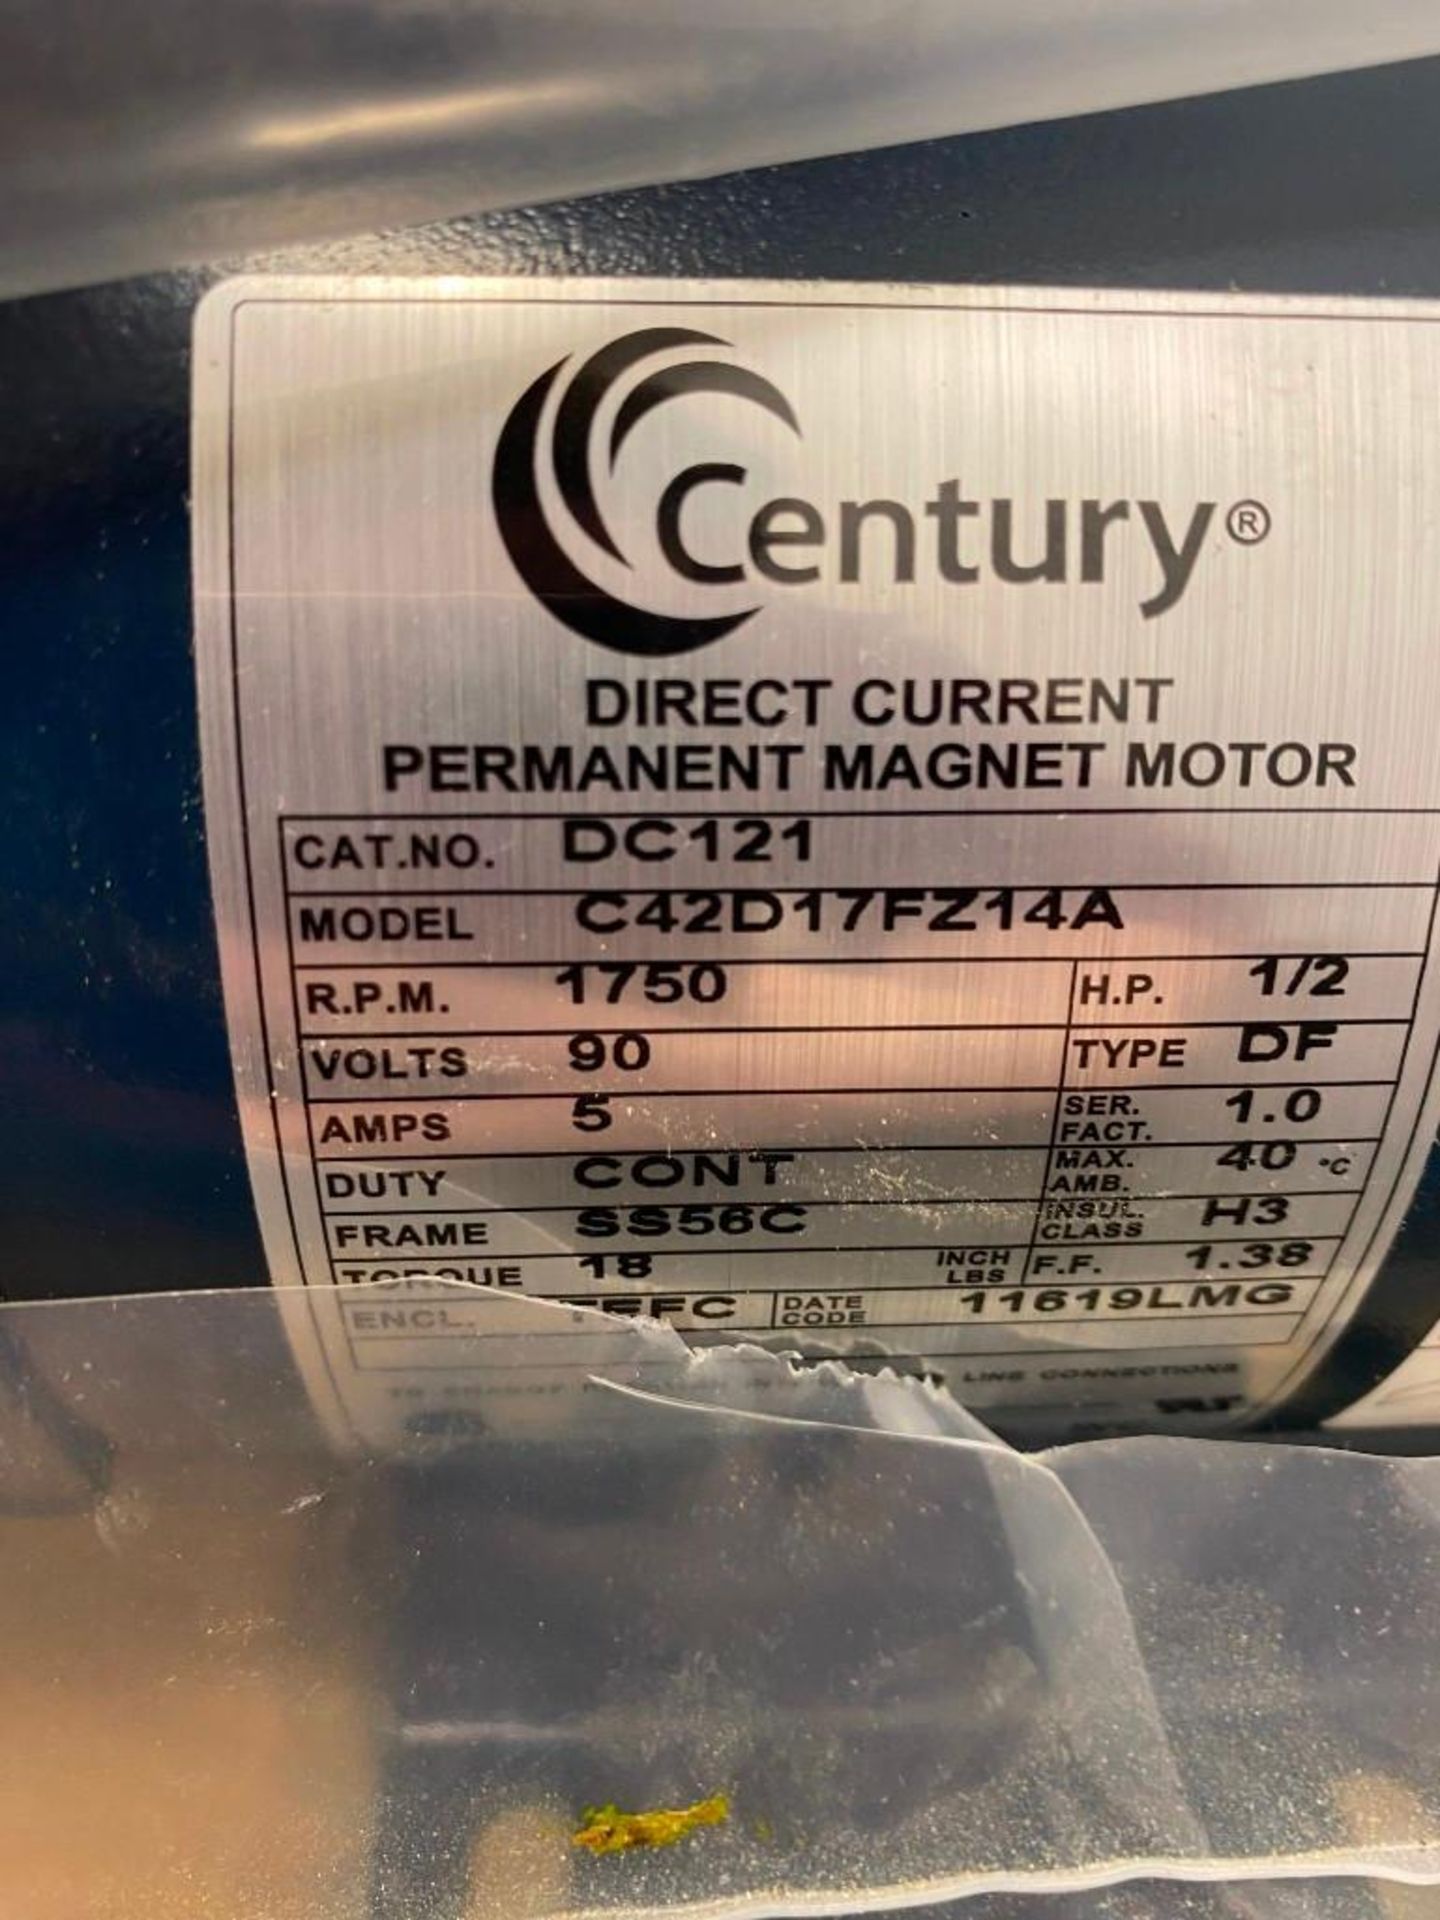 NEW IN ORIGINAL PACKAGING CENTURY C42D17FZ14A - Image 2 of 3